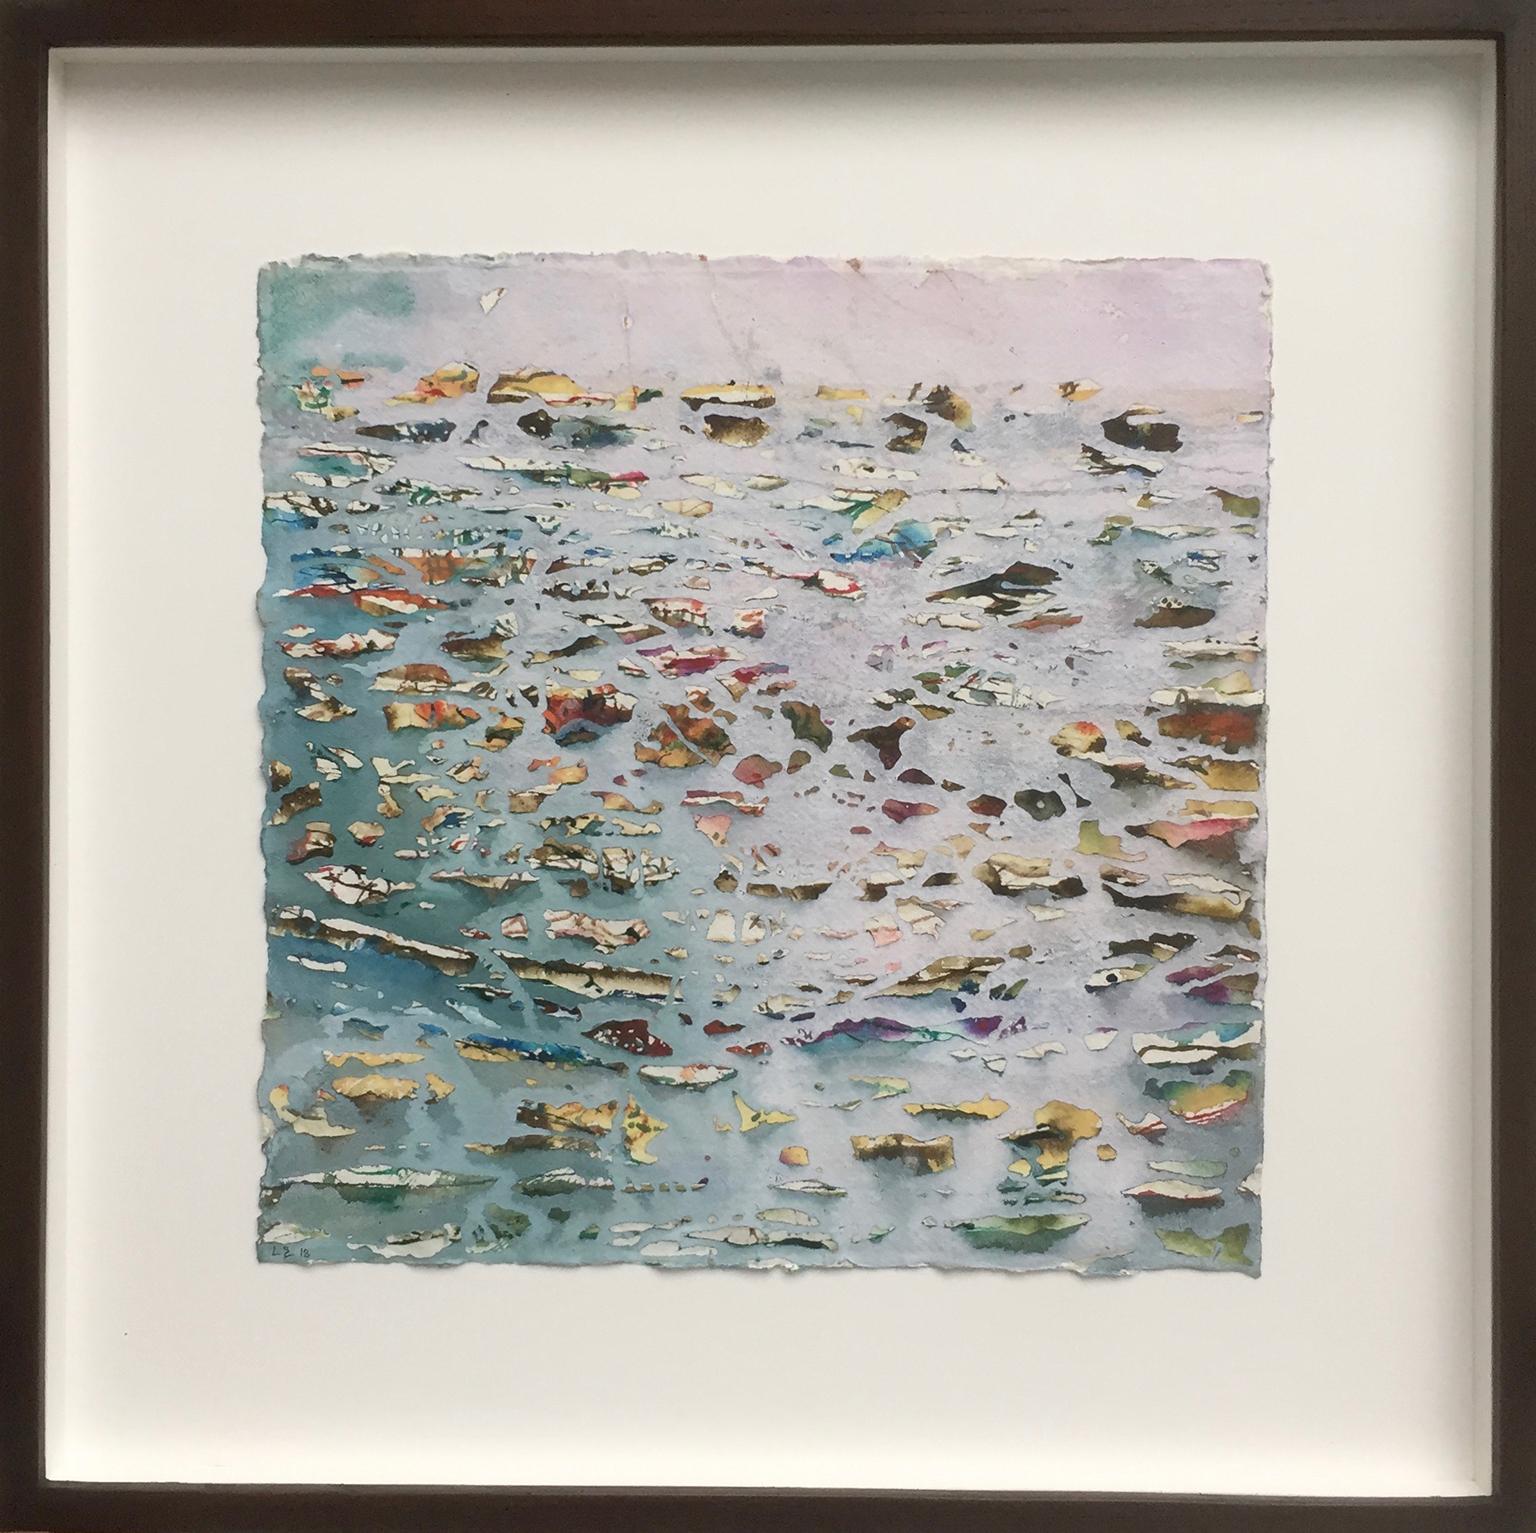 Waterline 16 - Abstract mixed media landscape painting by Luke Elwes, 2017 For Sale 1